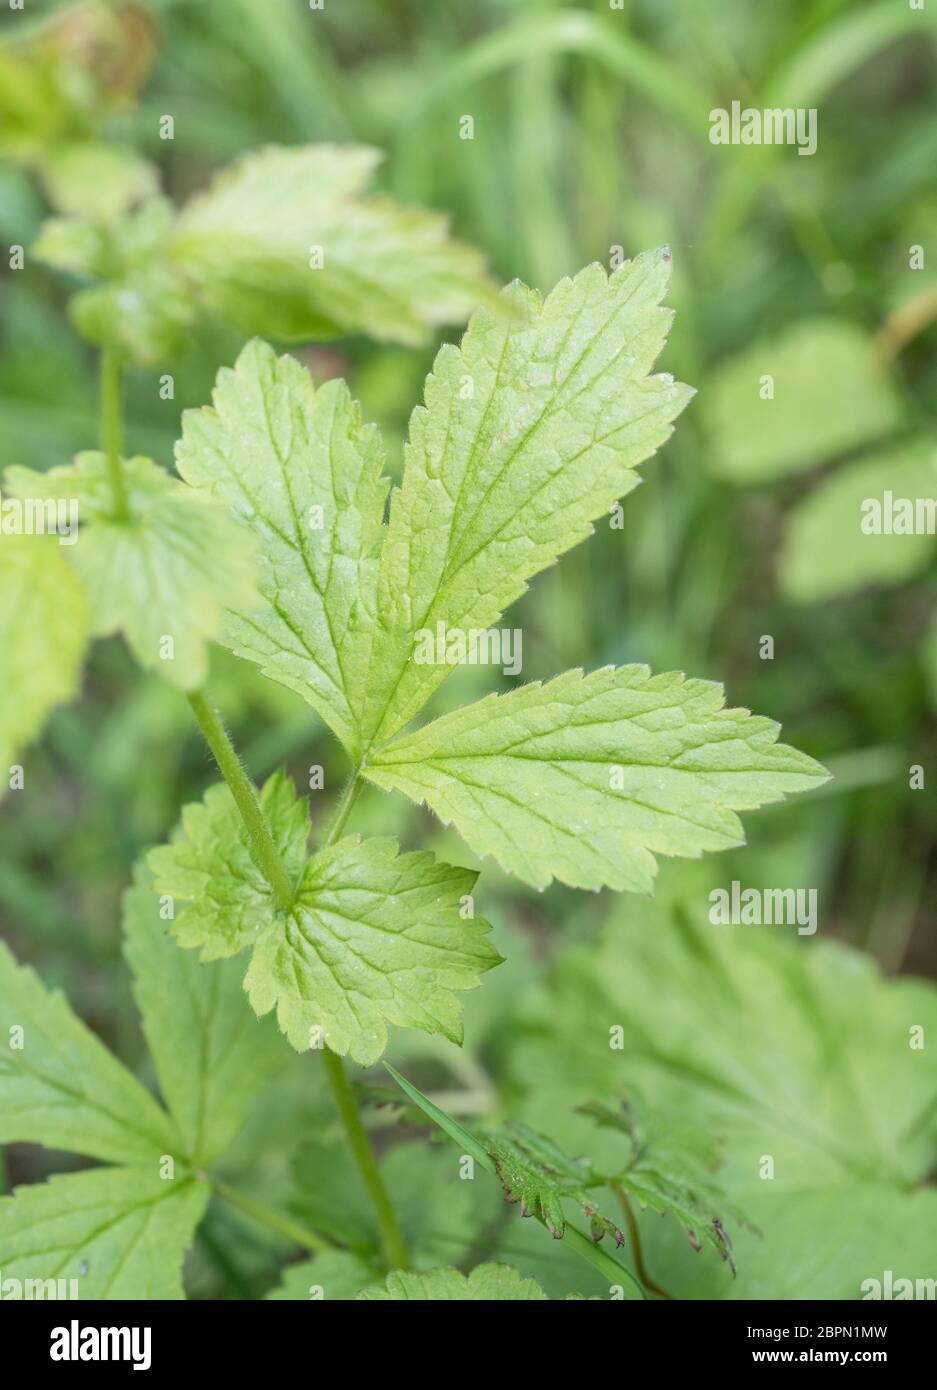 Close-up of the leaf of Herb Bennet, Wood Avens / Geum urbanum, once known as Clove Root as it tastes and smells of Cloves. Medicinal plant. Stock Photo